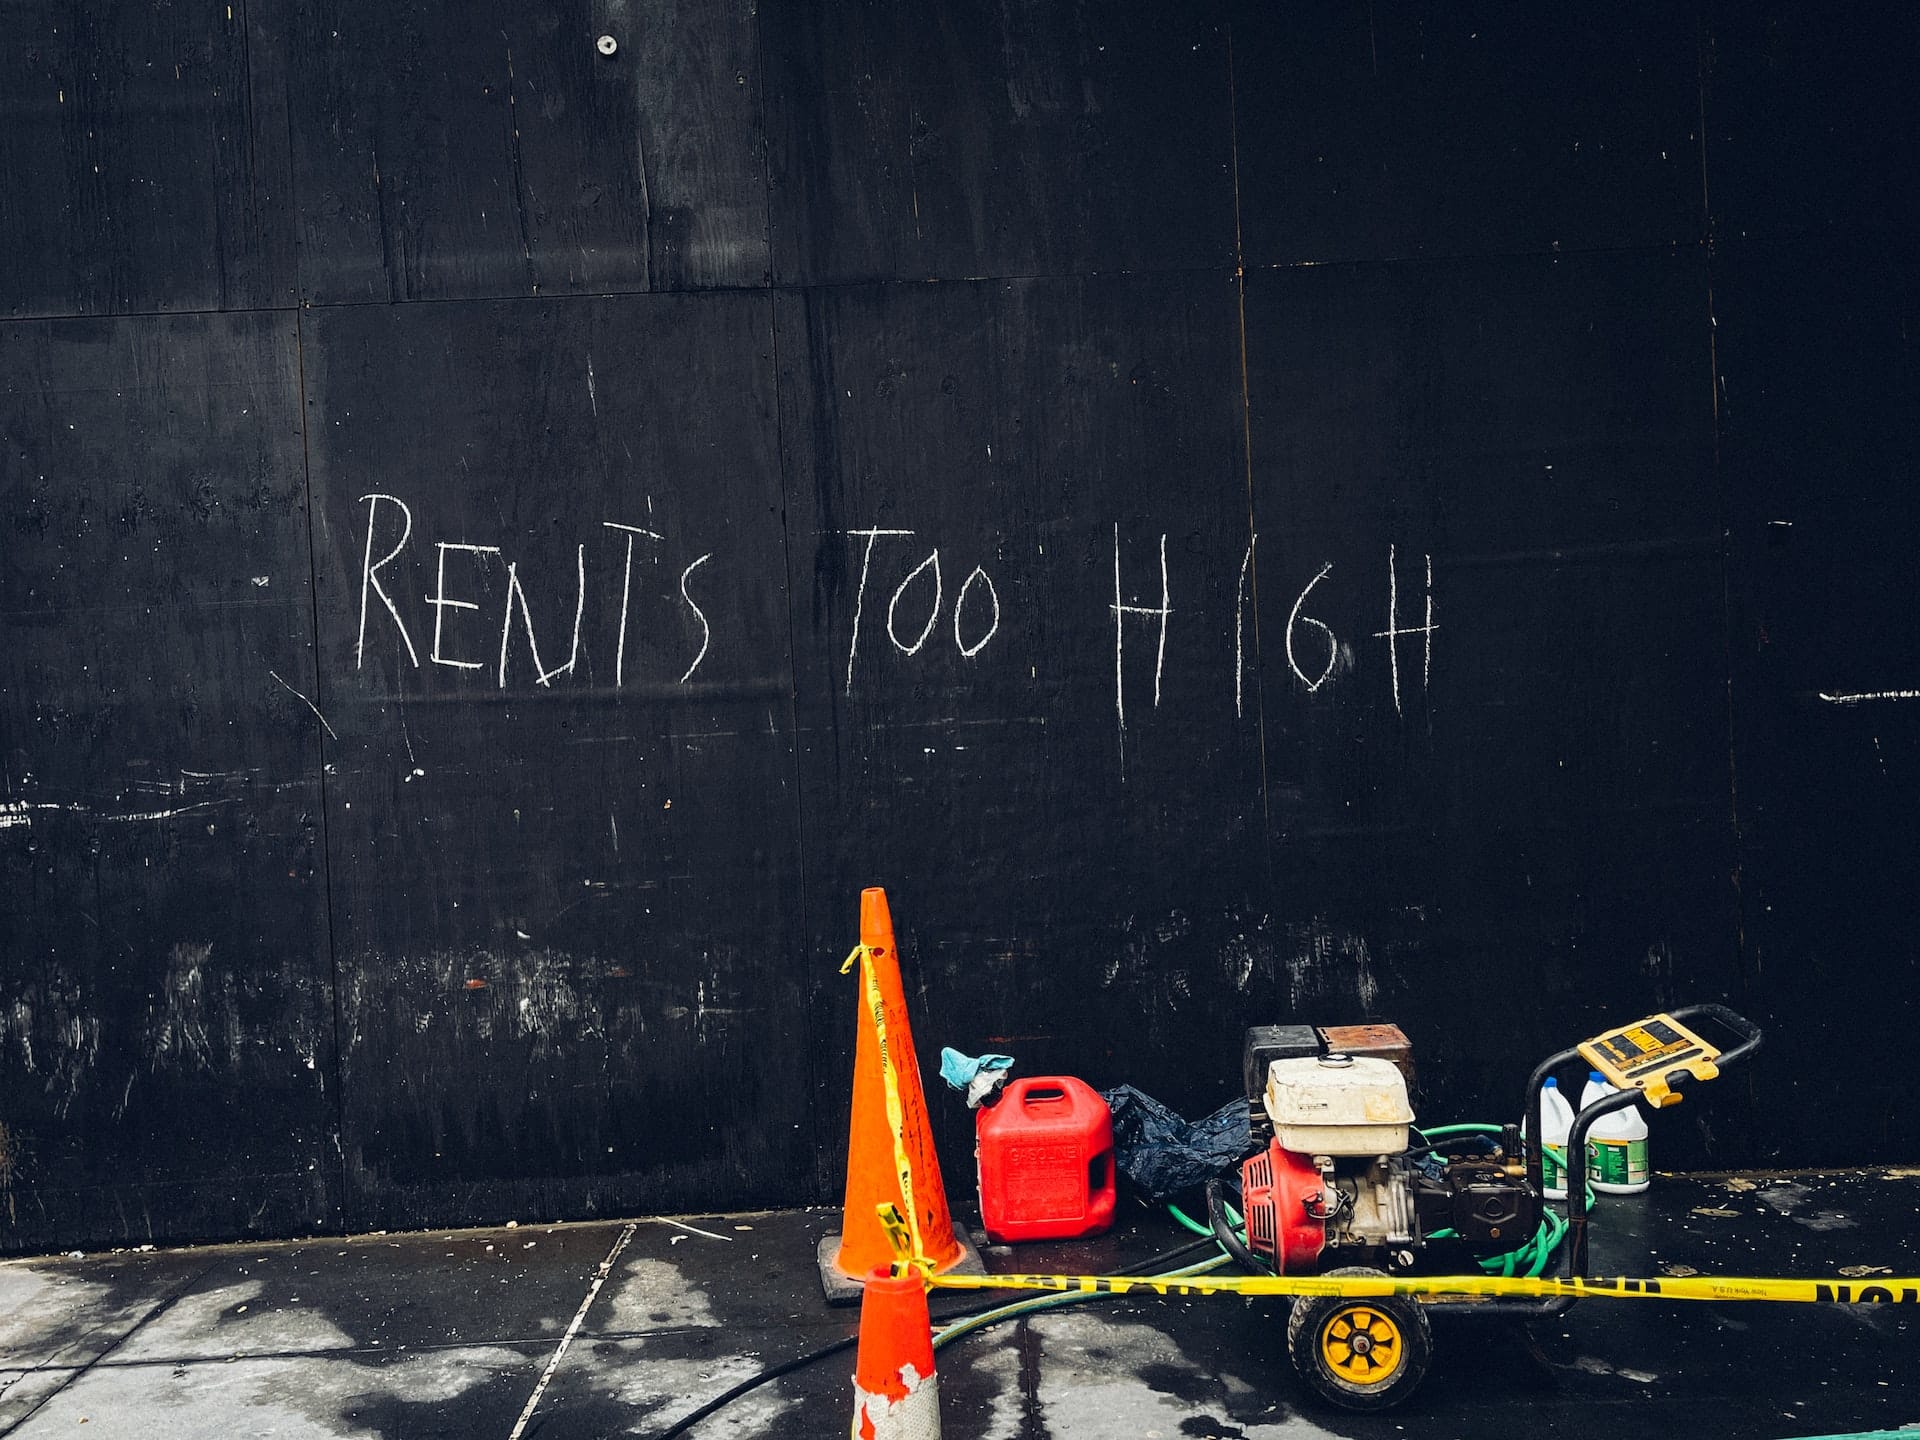 Black wall with the words "rents too high" written on it. An orange cone, red gas can, yellow caution tape, and generator in front of black wall.